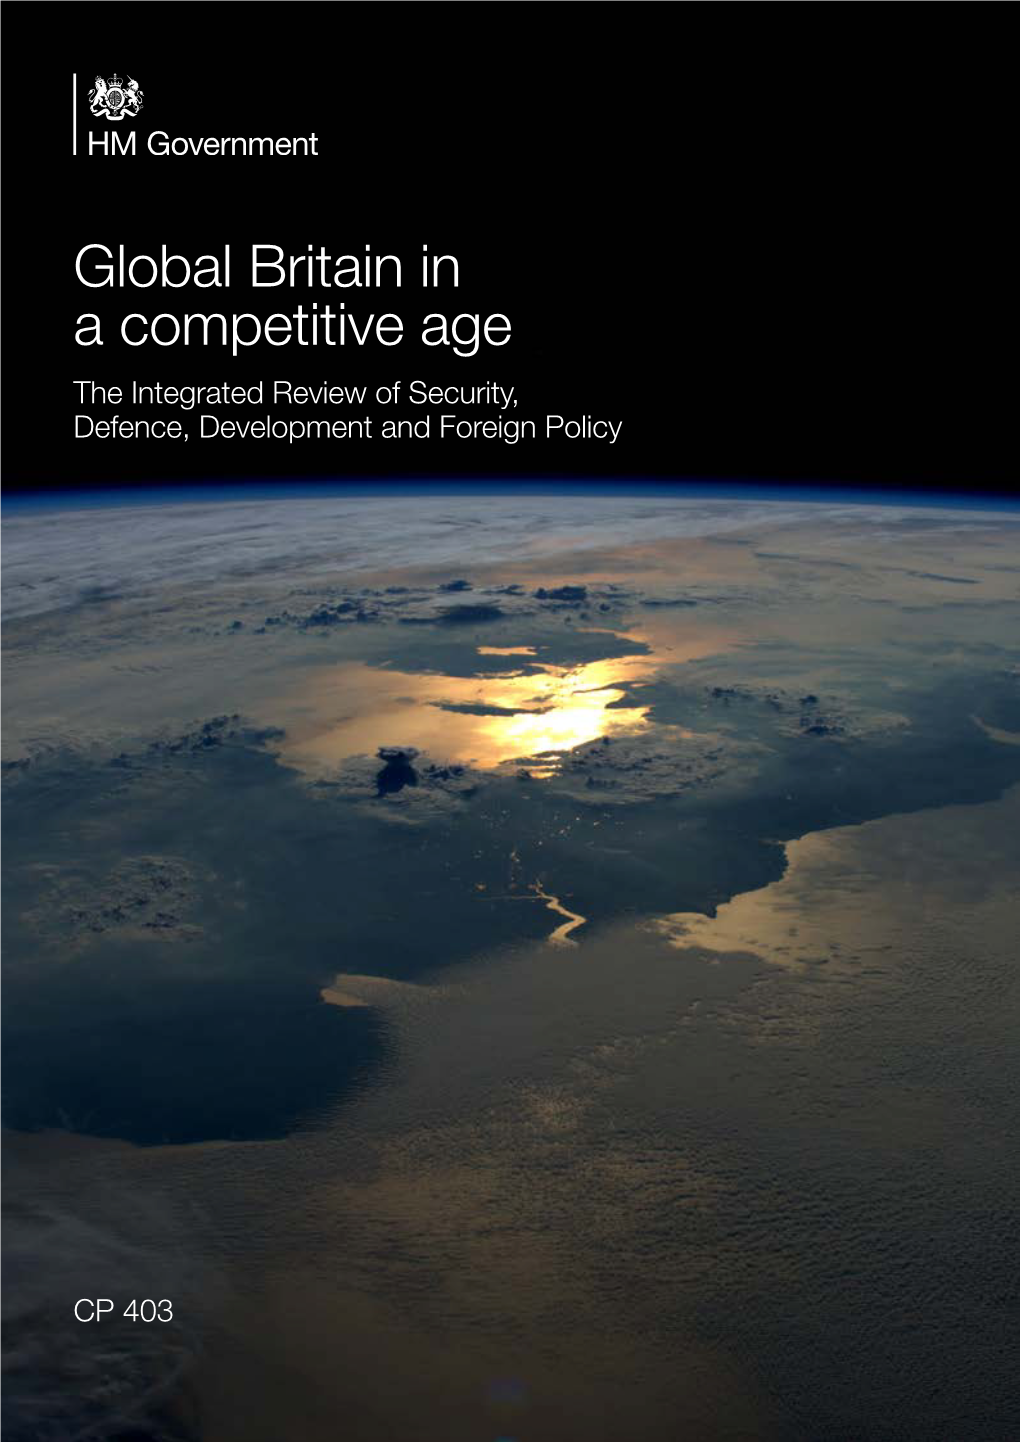 Global Britain in a Competitive Age the Integrated Review of Security, Defence, Development and Foreign Policy